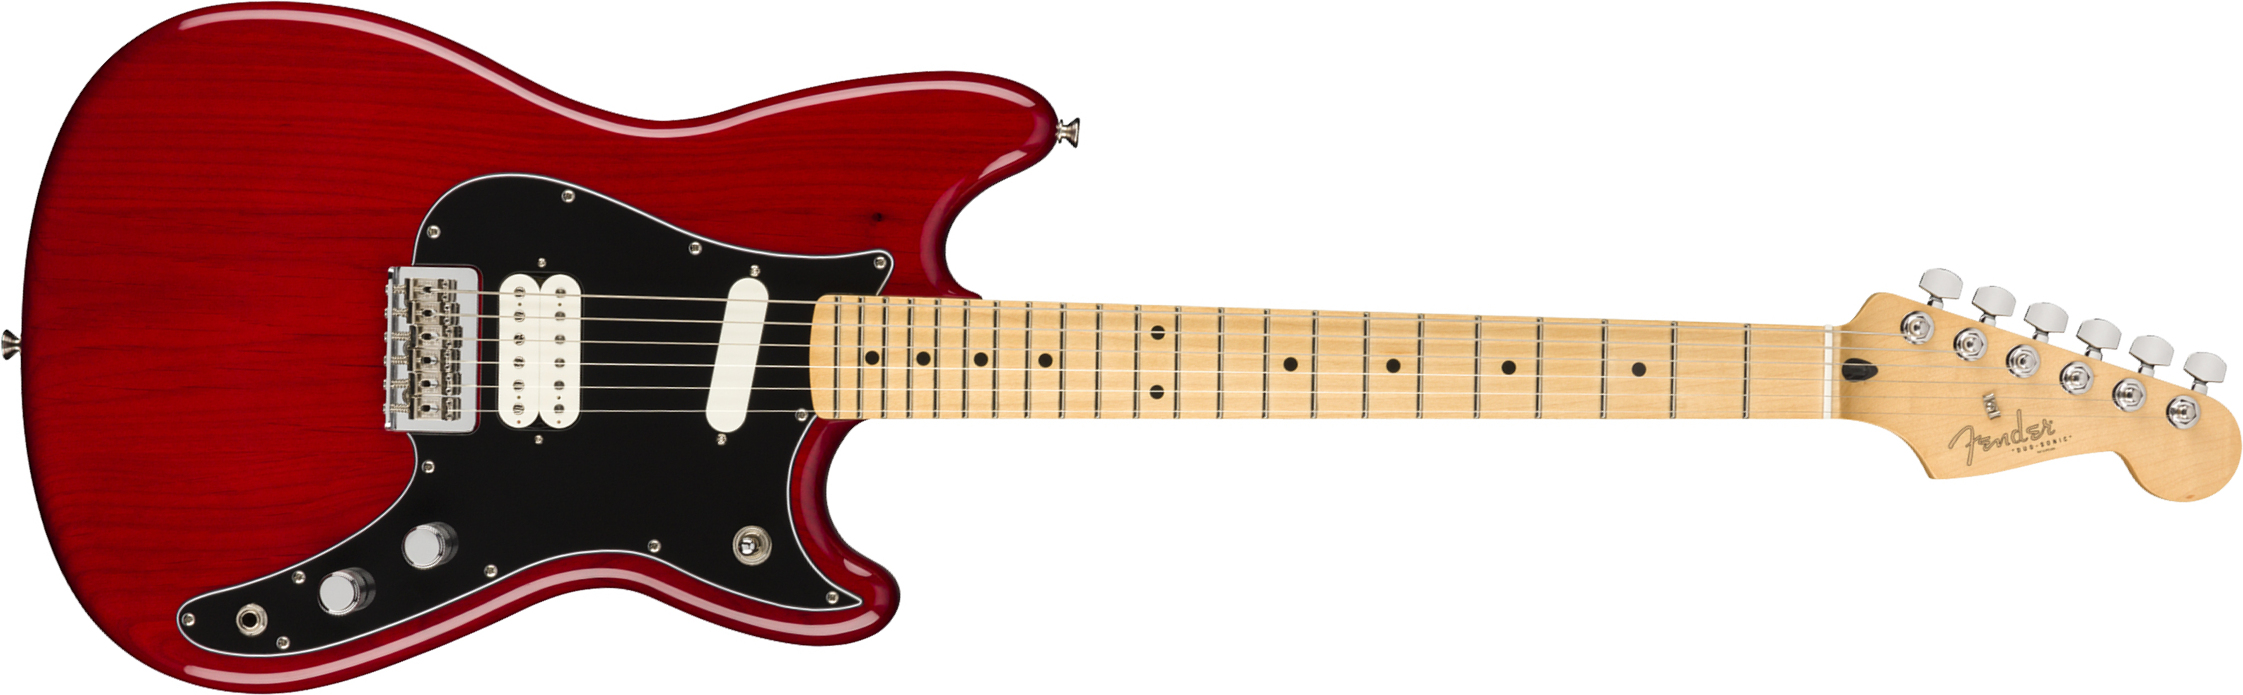 Fender Player Duo-Sonic HS (MEX, MN) - crimson red transparent